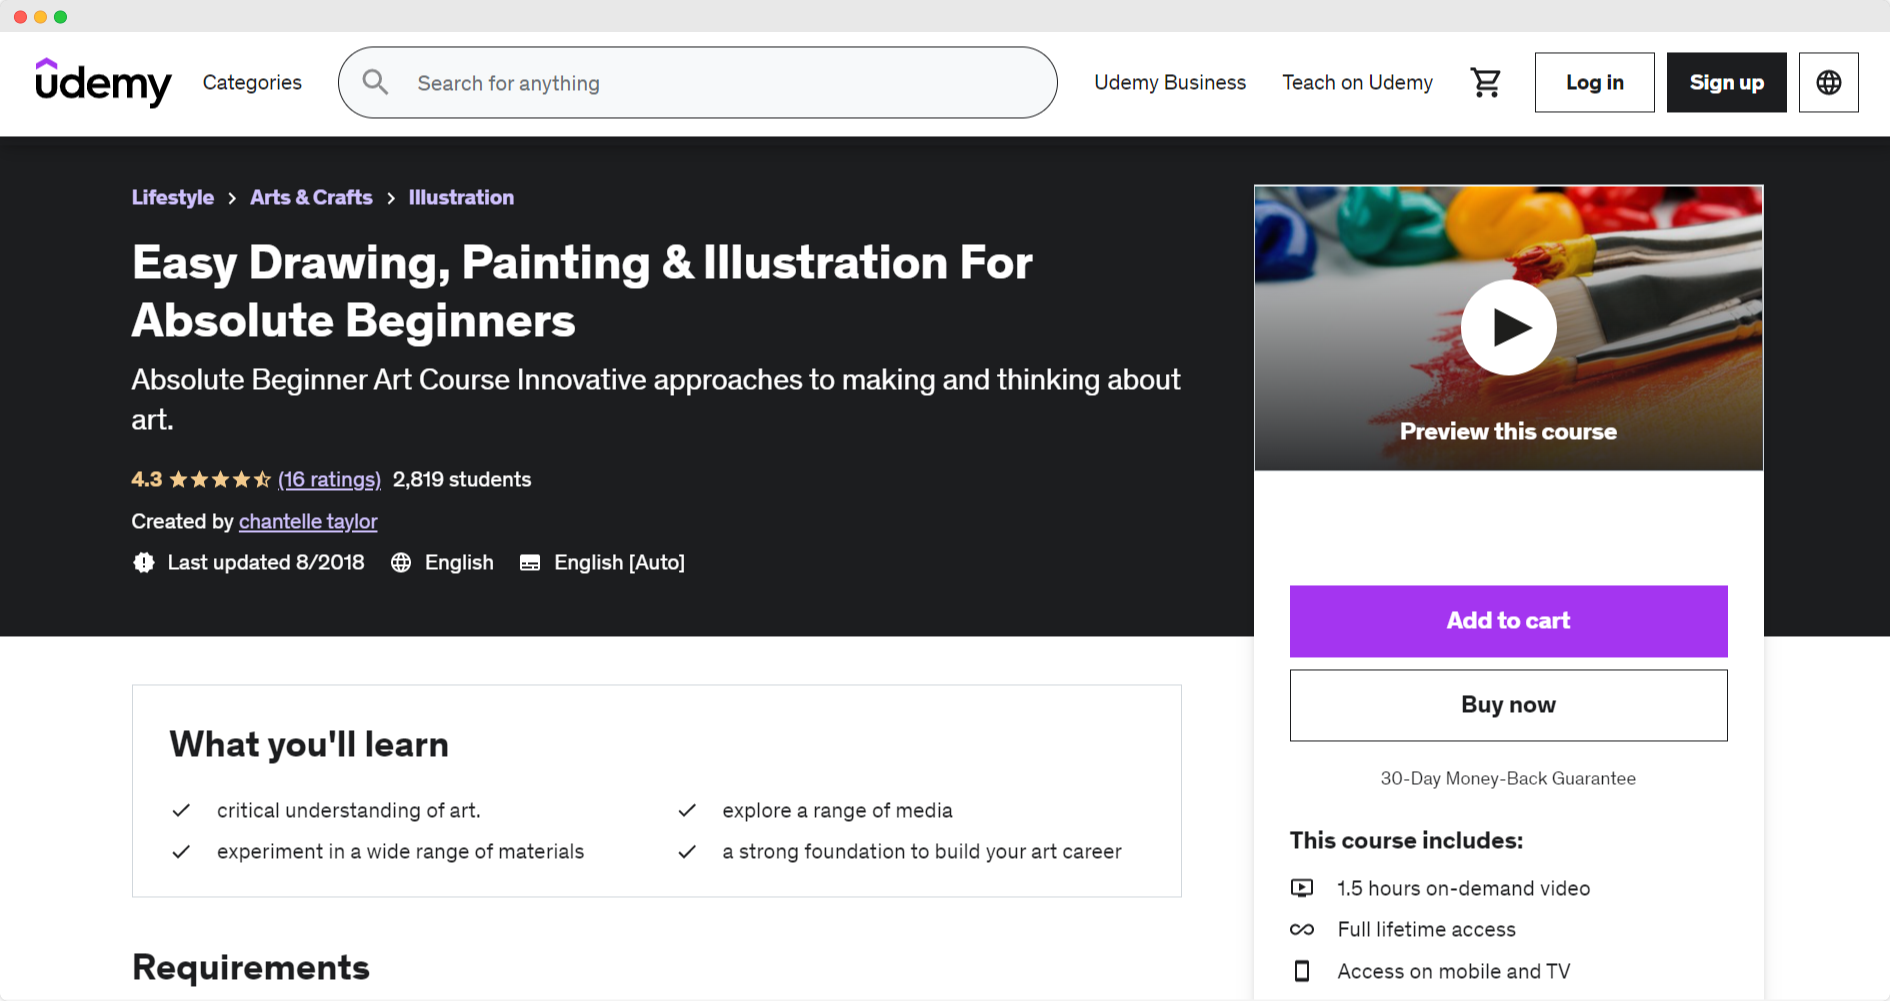 Udemy - Easy Drawing, Painting & Illustration for Absolute Beginners